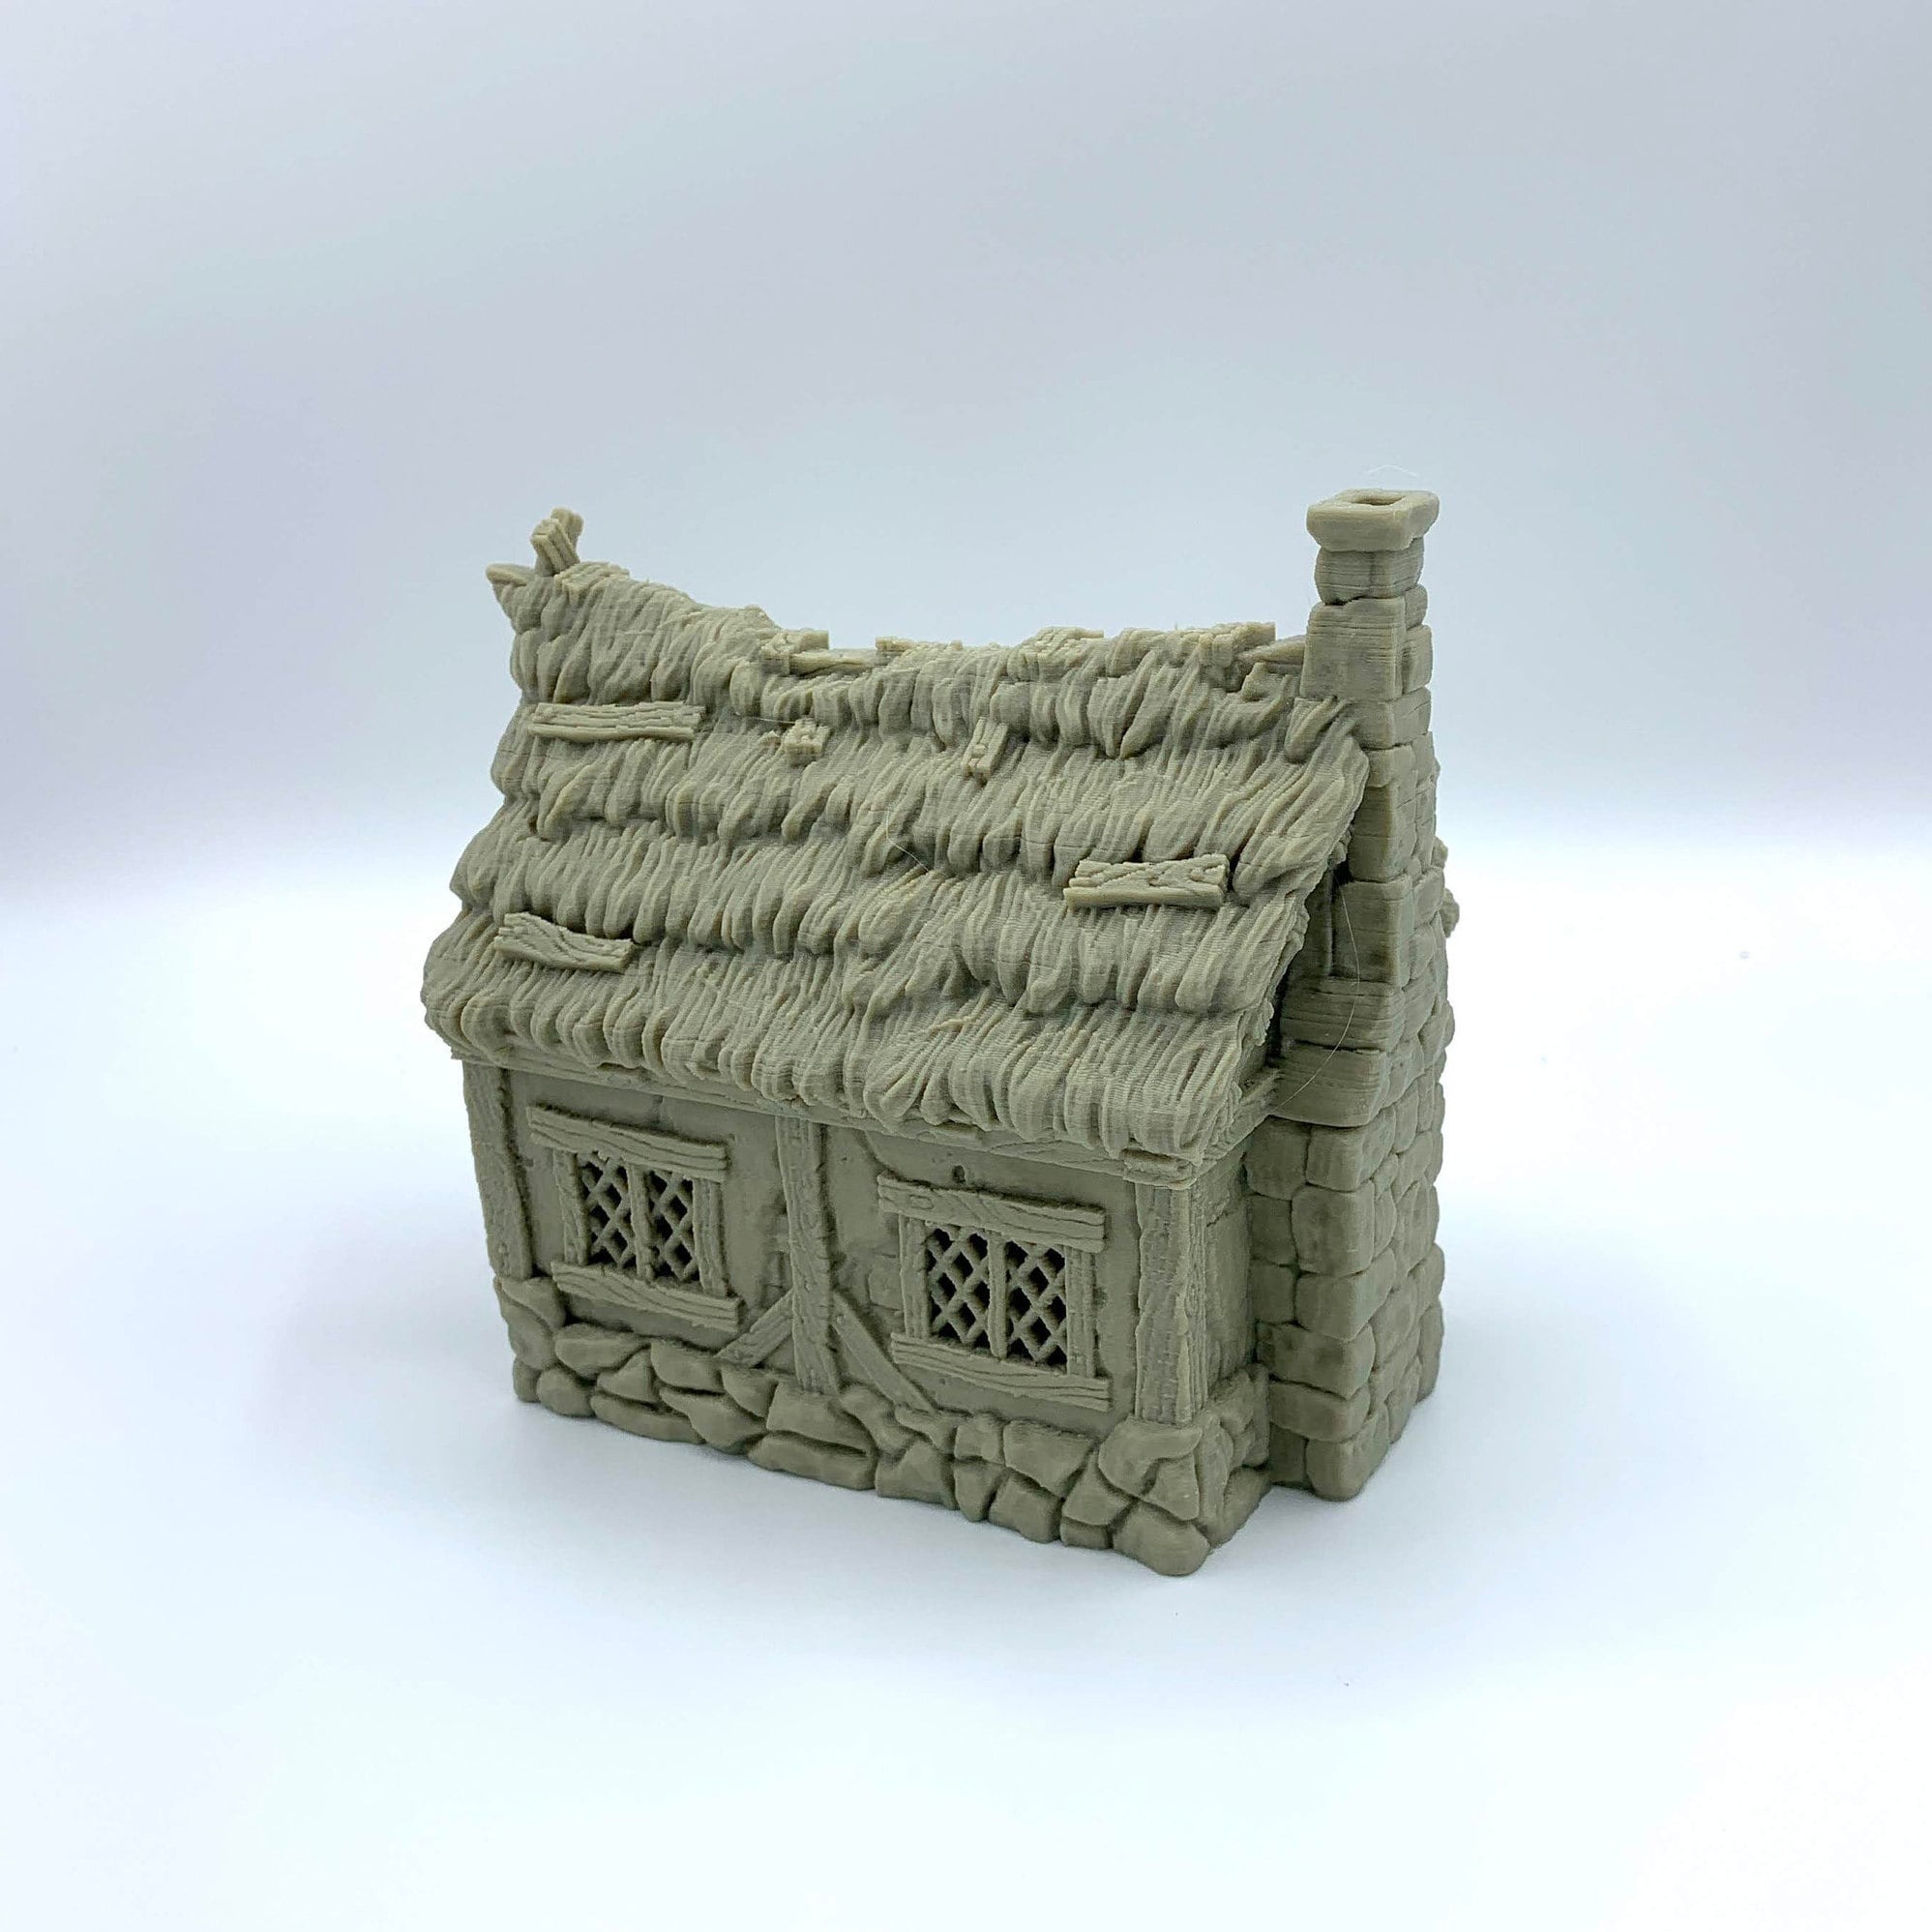 City Of Tarok - Medieval House 4 (Thatched Roof Version) / 28mm Wargame / RPG 3d Printed Tabletop Terrain